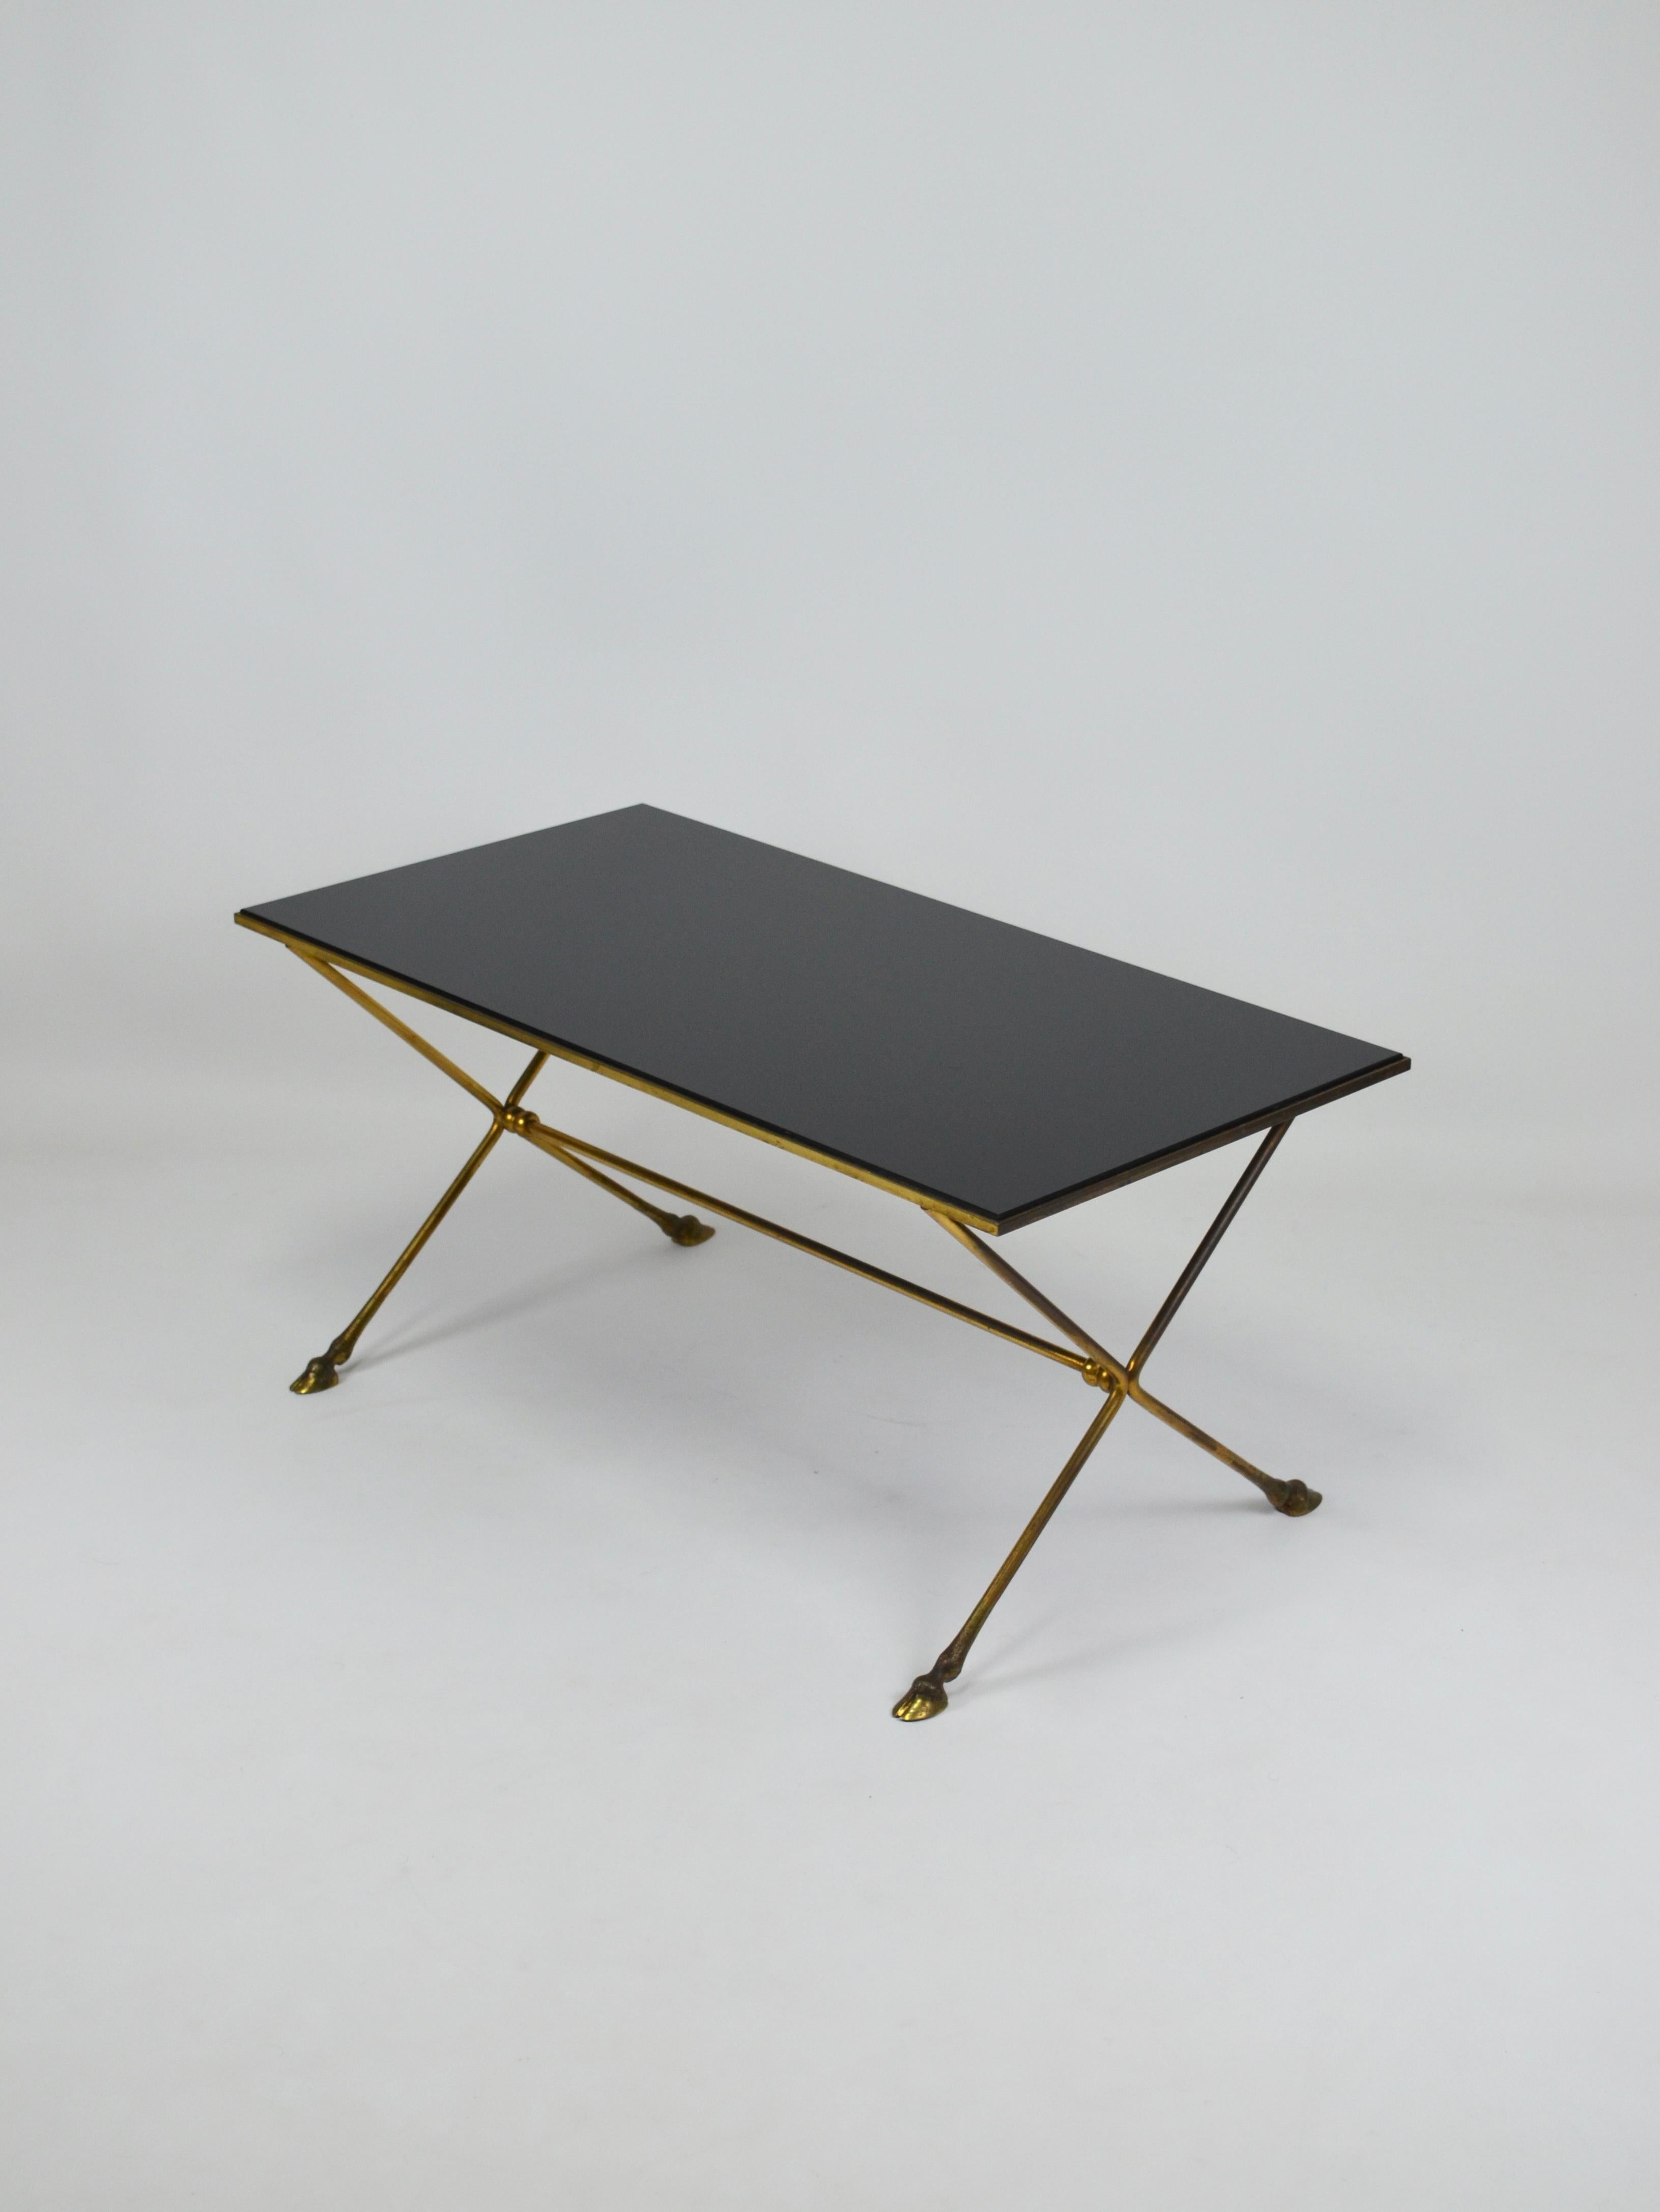 Elegant neo-classical table from the 60's in gilded brass attributed to Maison JANSEN with hoof-shaped legs and bevelled top in glass.
Base with round X-shaped legs with intermediate spacer.